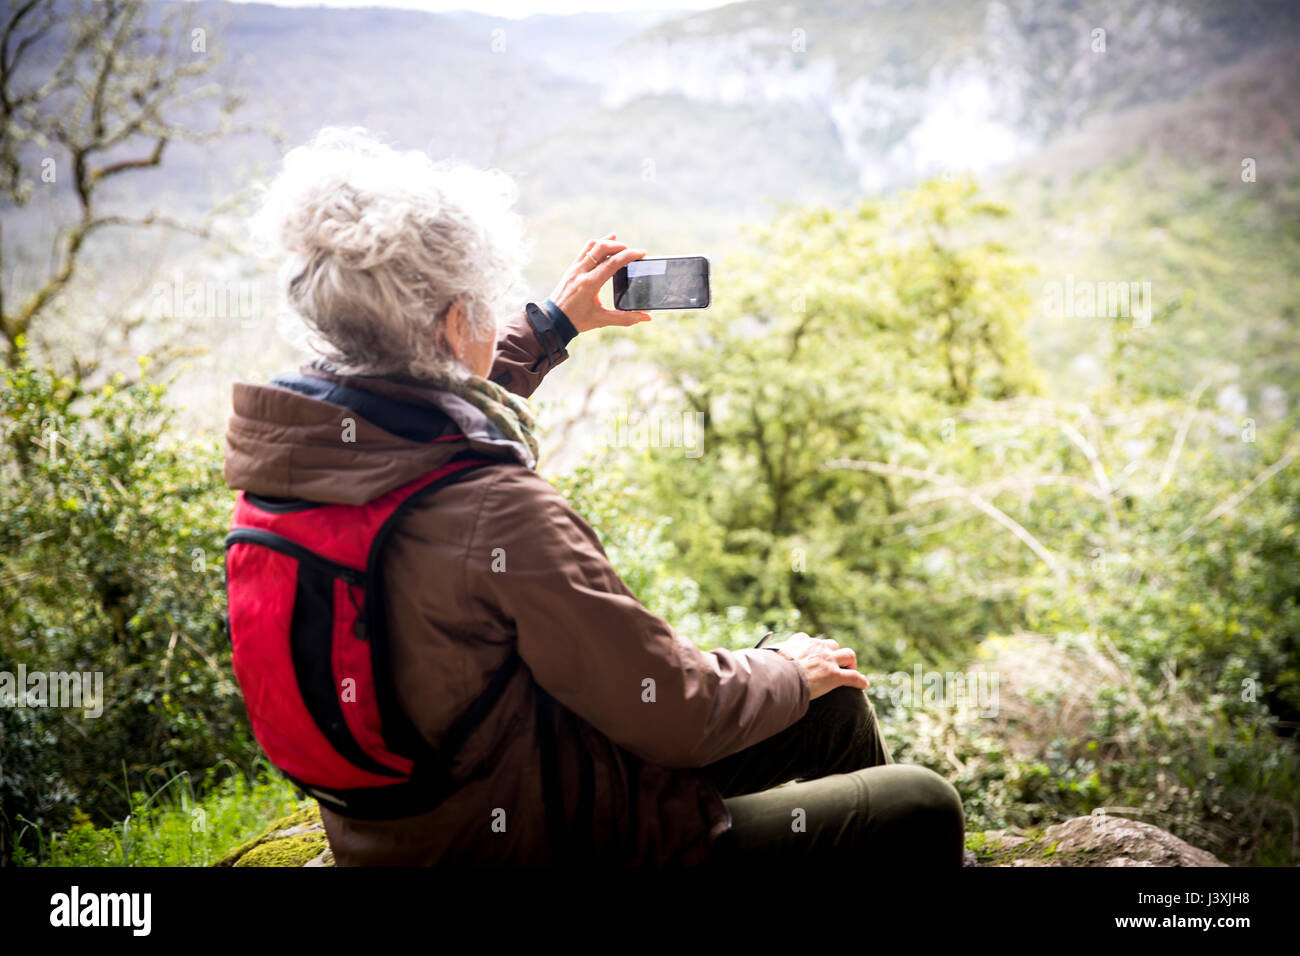 Woman hiker photographing elevated view, Bruniquel, France Stock Photo